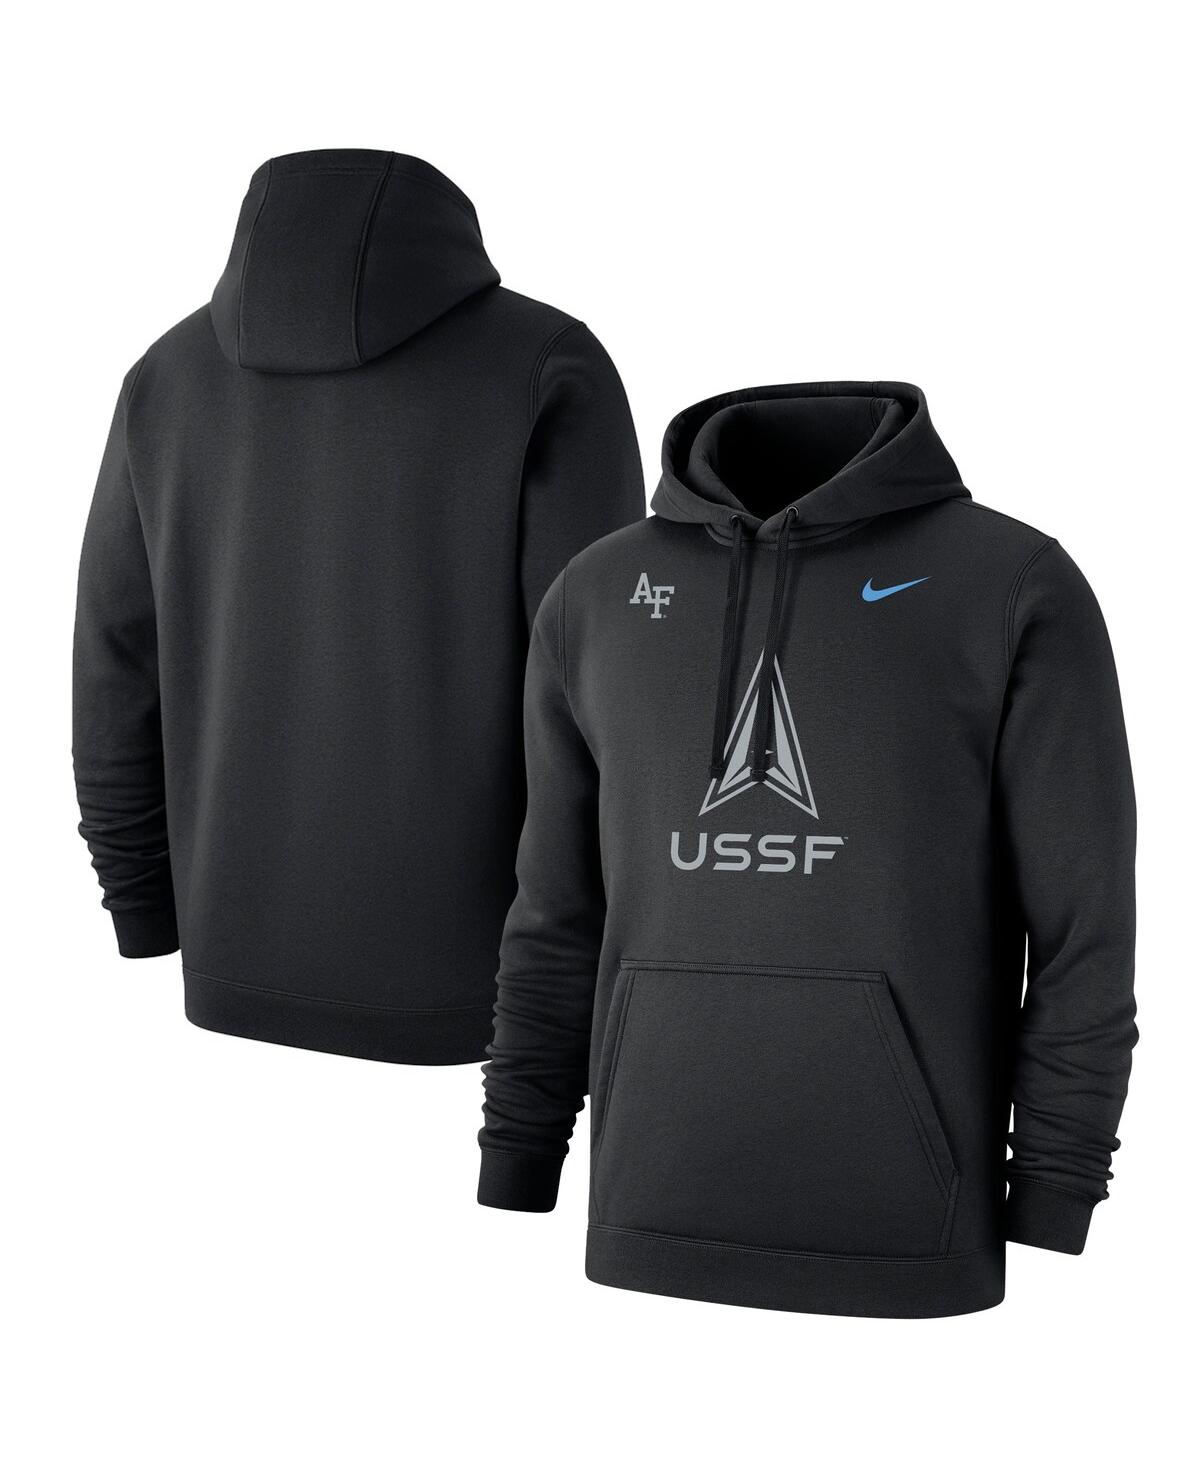 Men's Nike Black Air Force Falcons Space Force Rivalry Fleece Pullover Hoodie